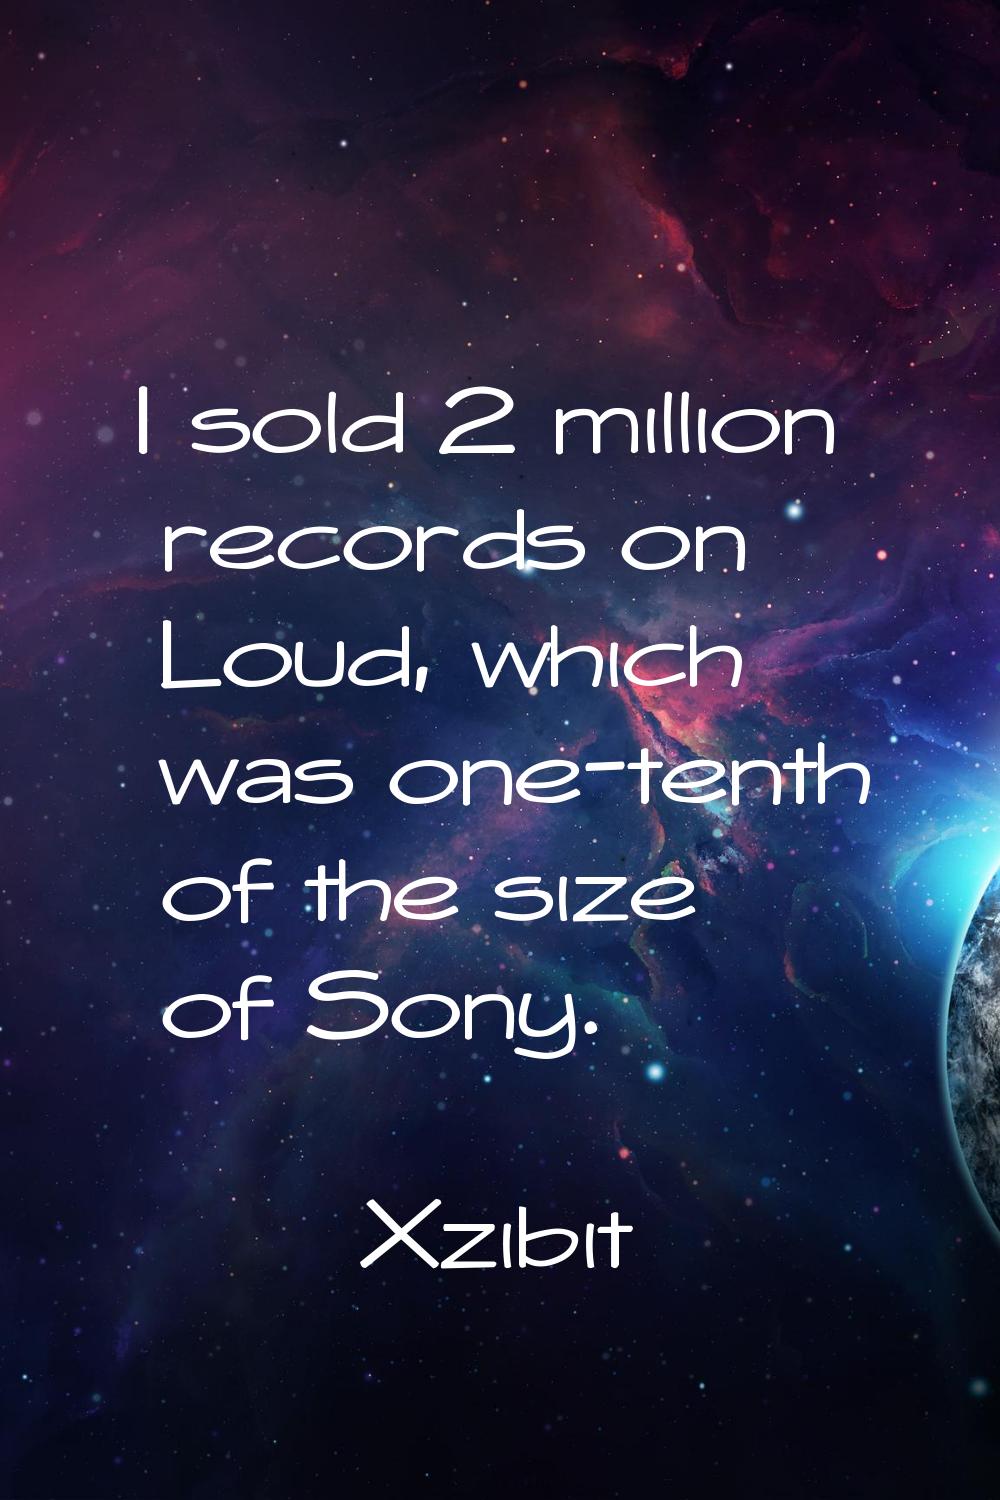 I sold 2 million records on Loud, which was one-tenth of the size of Sony.